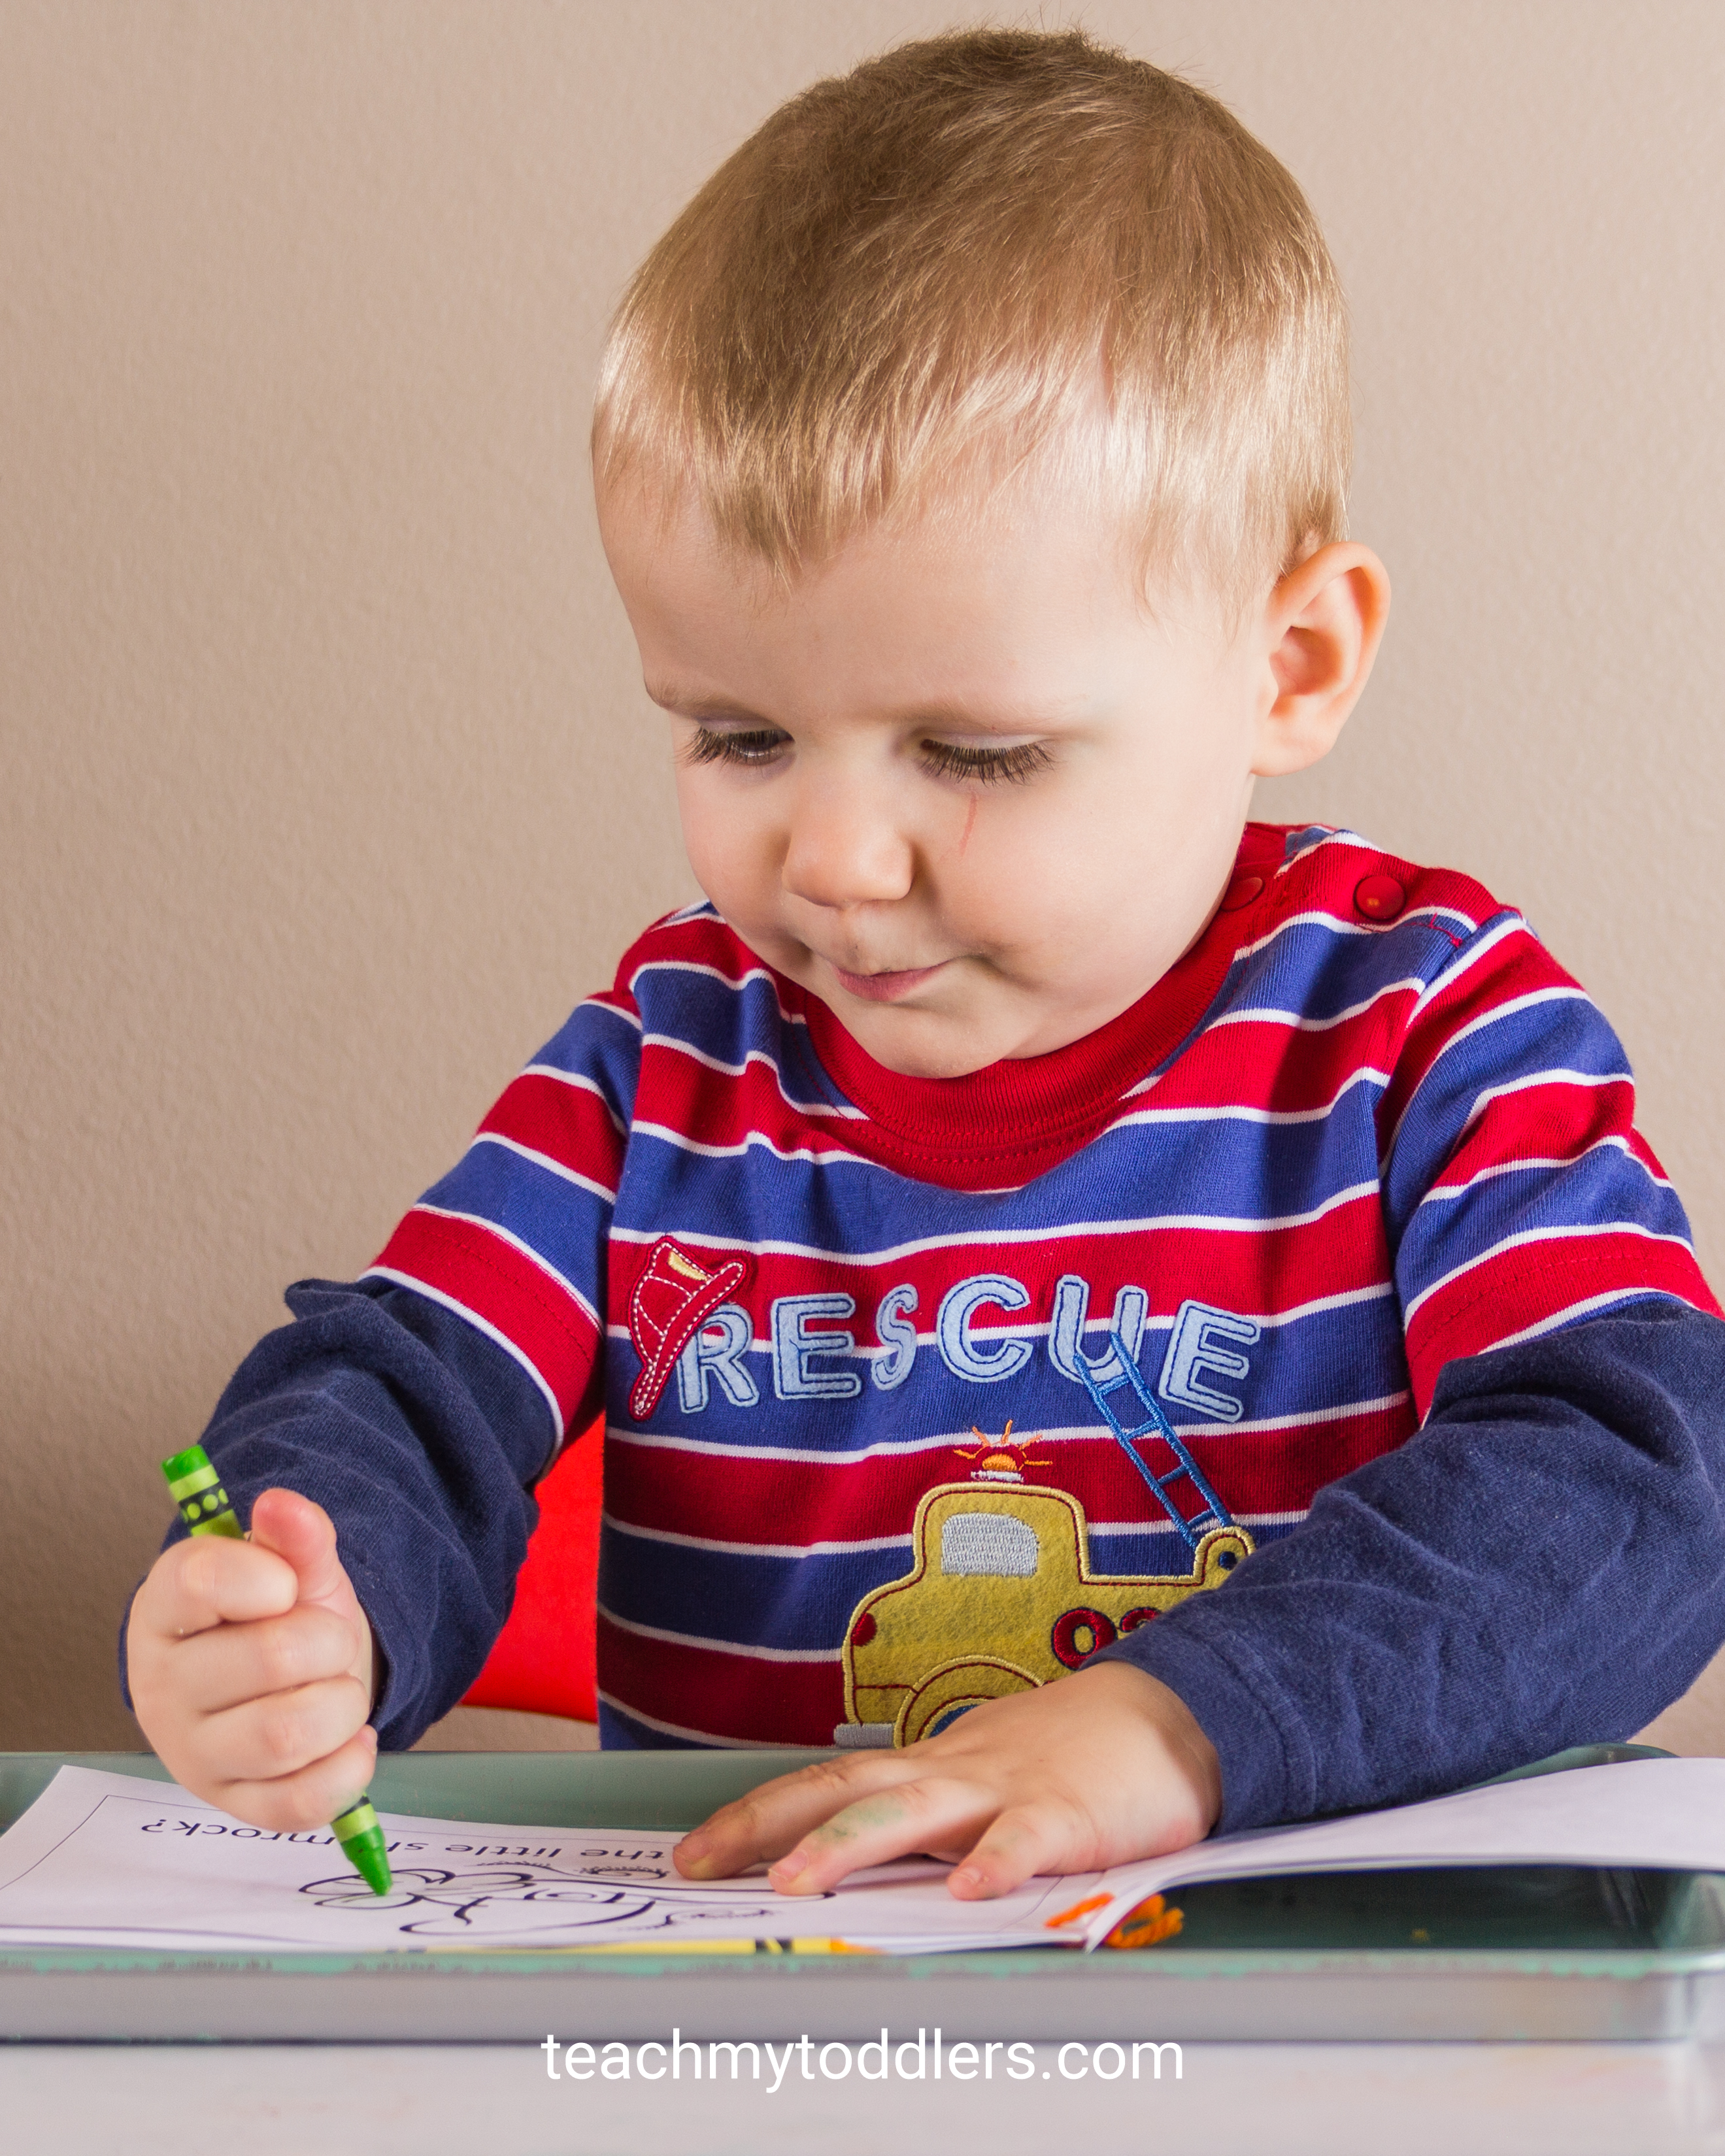 Use these fun St. Patrick's Day activities to teach your toddlers about st. patrick's day